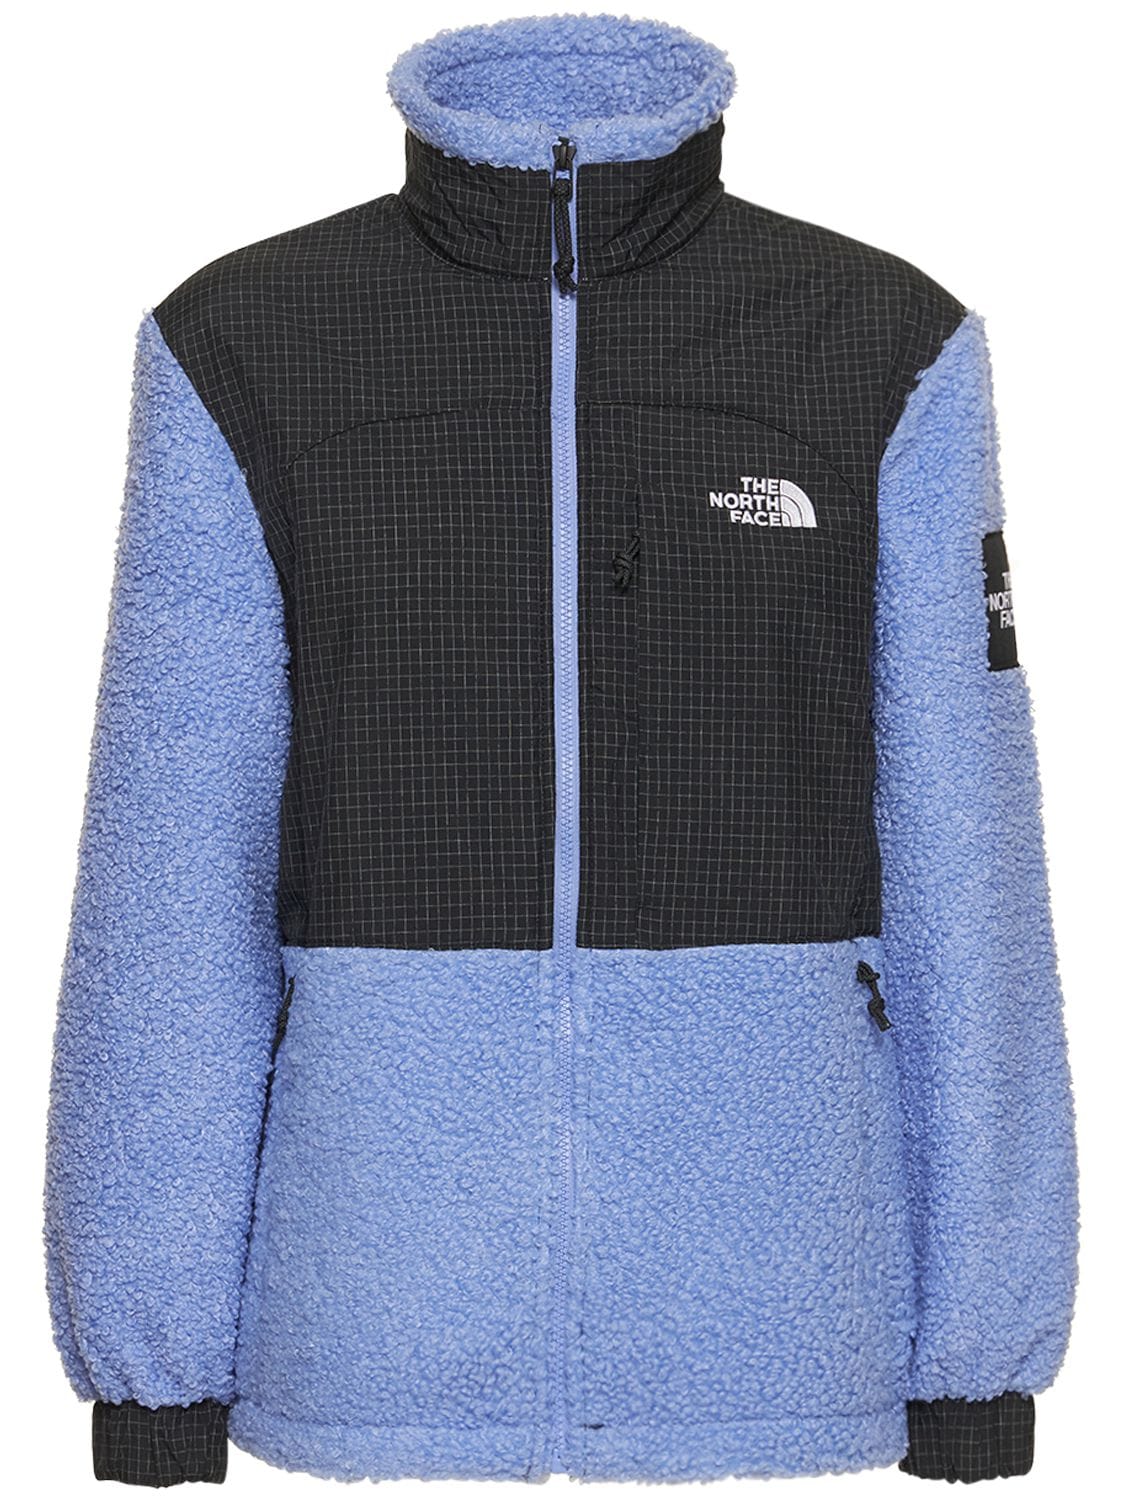 The North Face Denali Jacket In Deep Periwinkle (black)